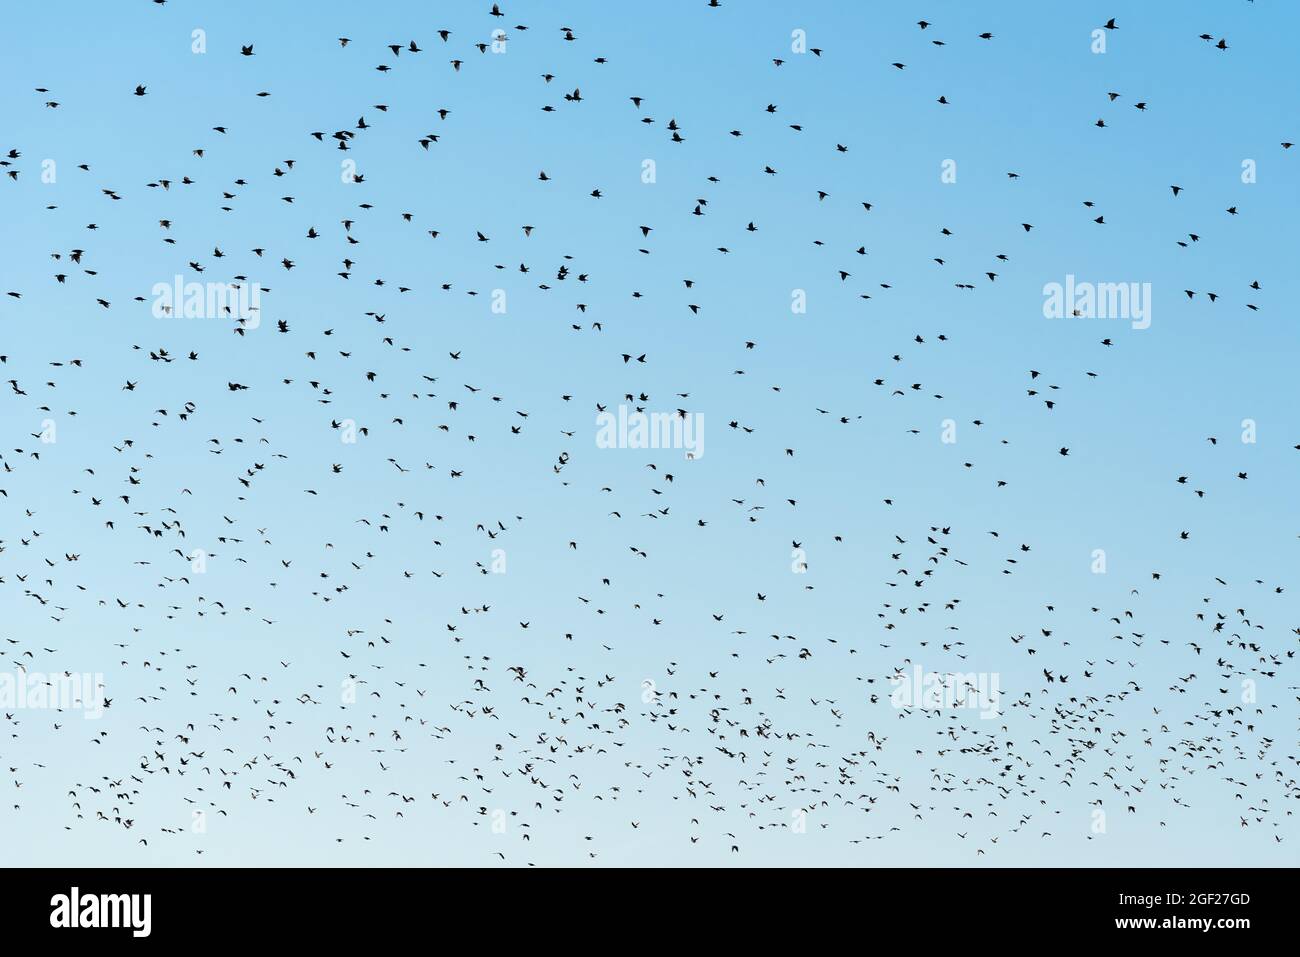 Flock of starling birds swarming at the sky, large group of animals as natural pattern Stock Photo